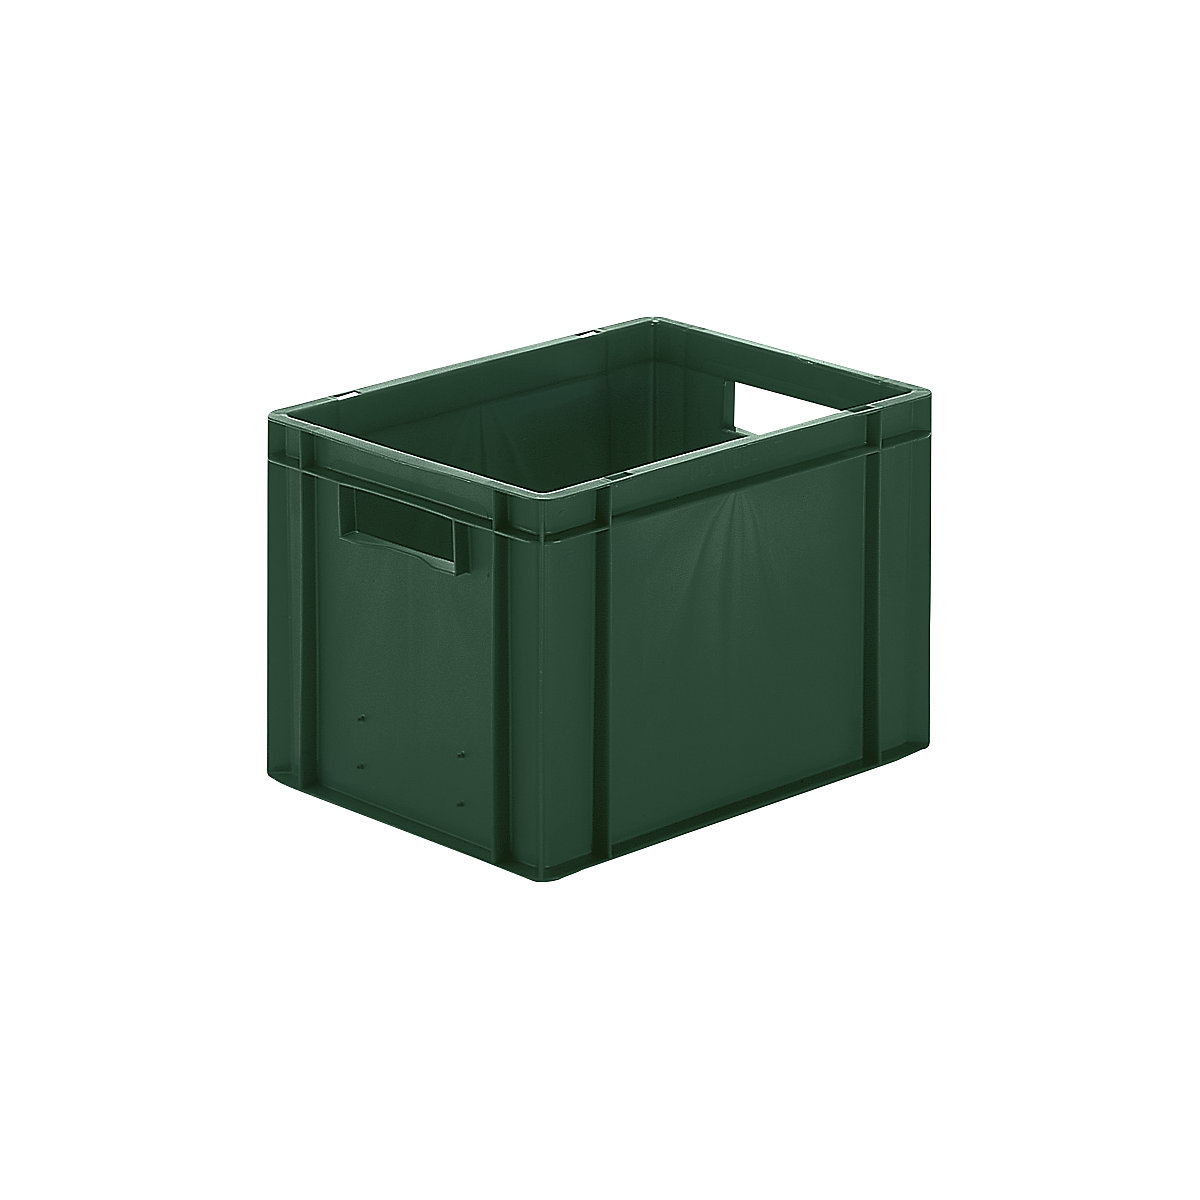 Euro stacking container, closed walls and base, LxWxH 400 x 300 x 270 mm, green, pack of 5-5